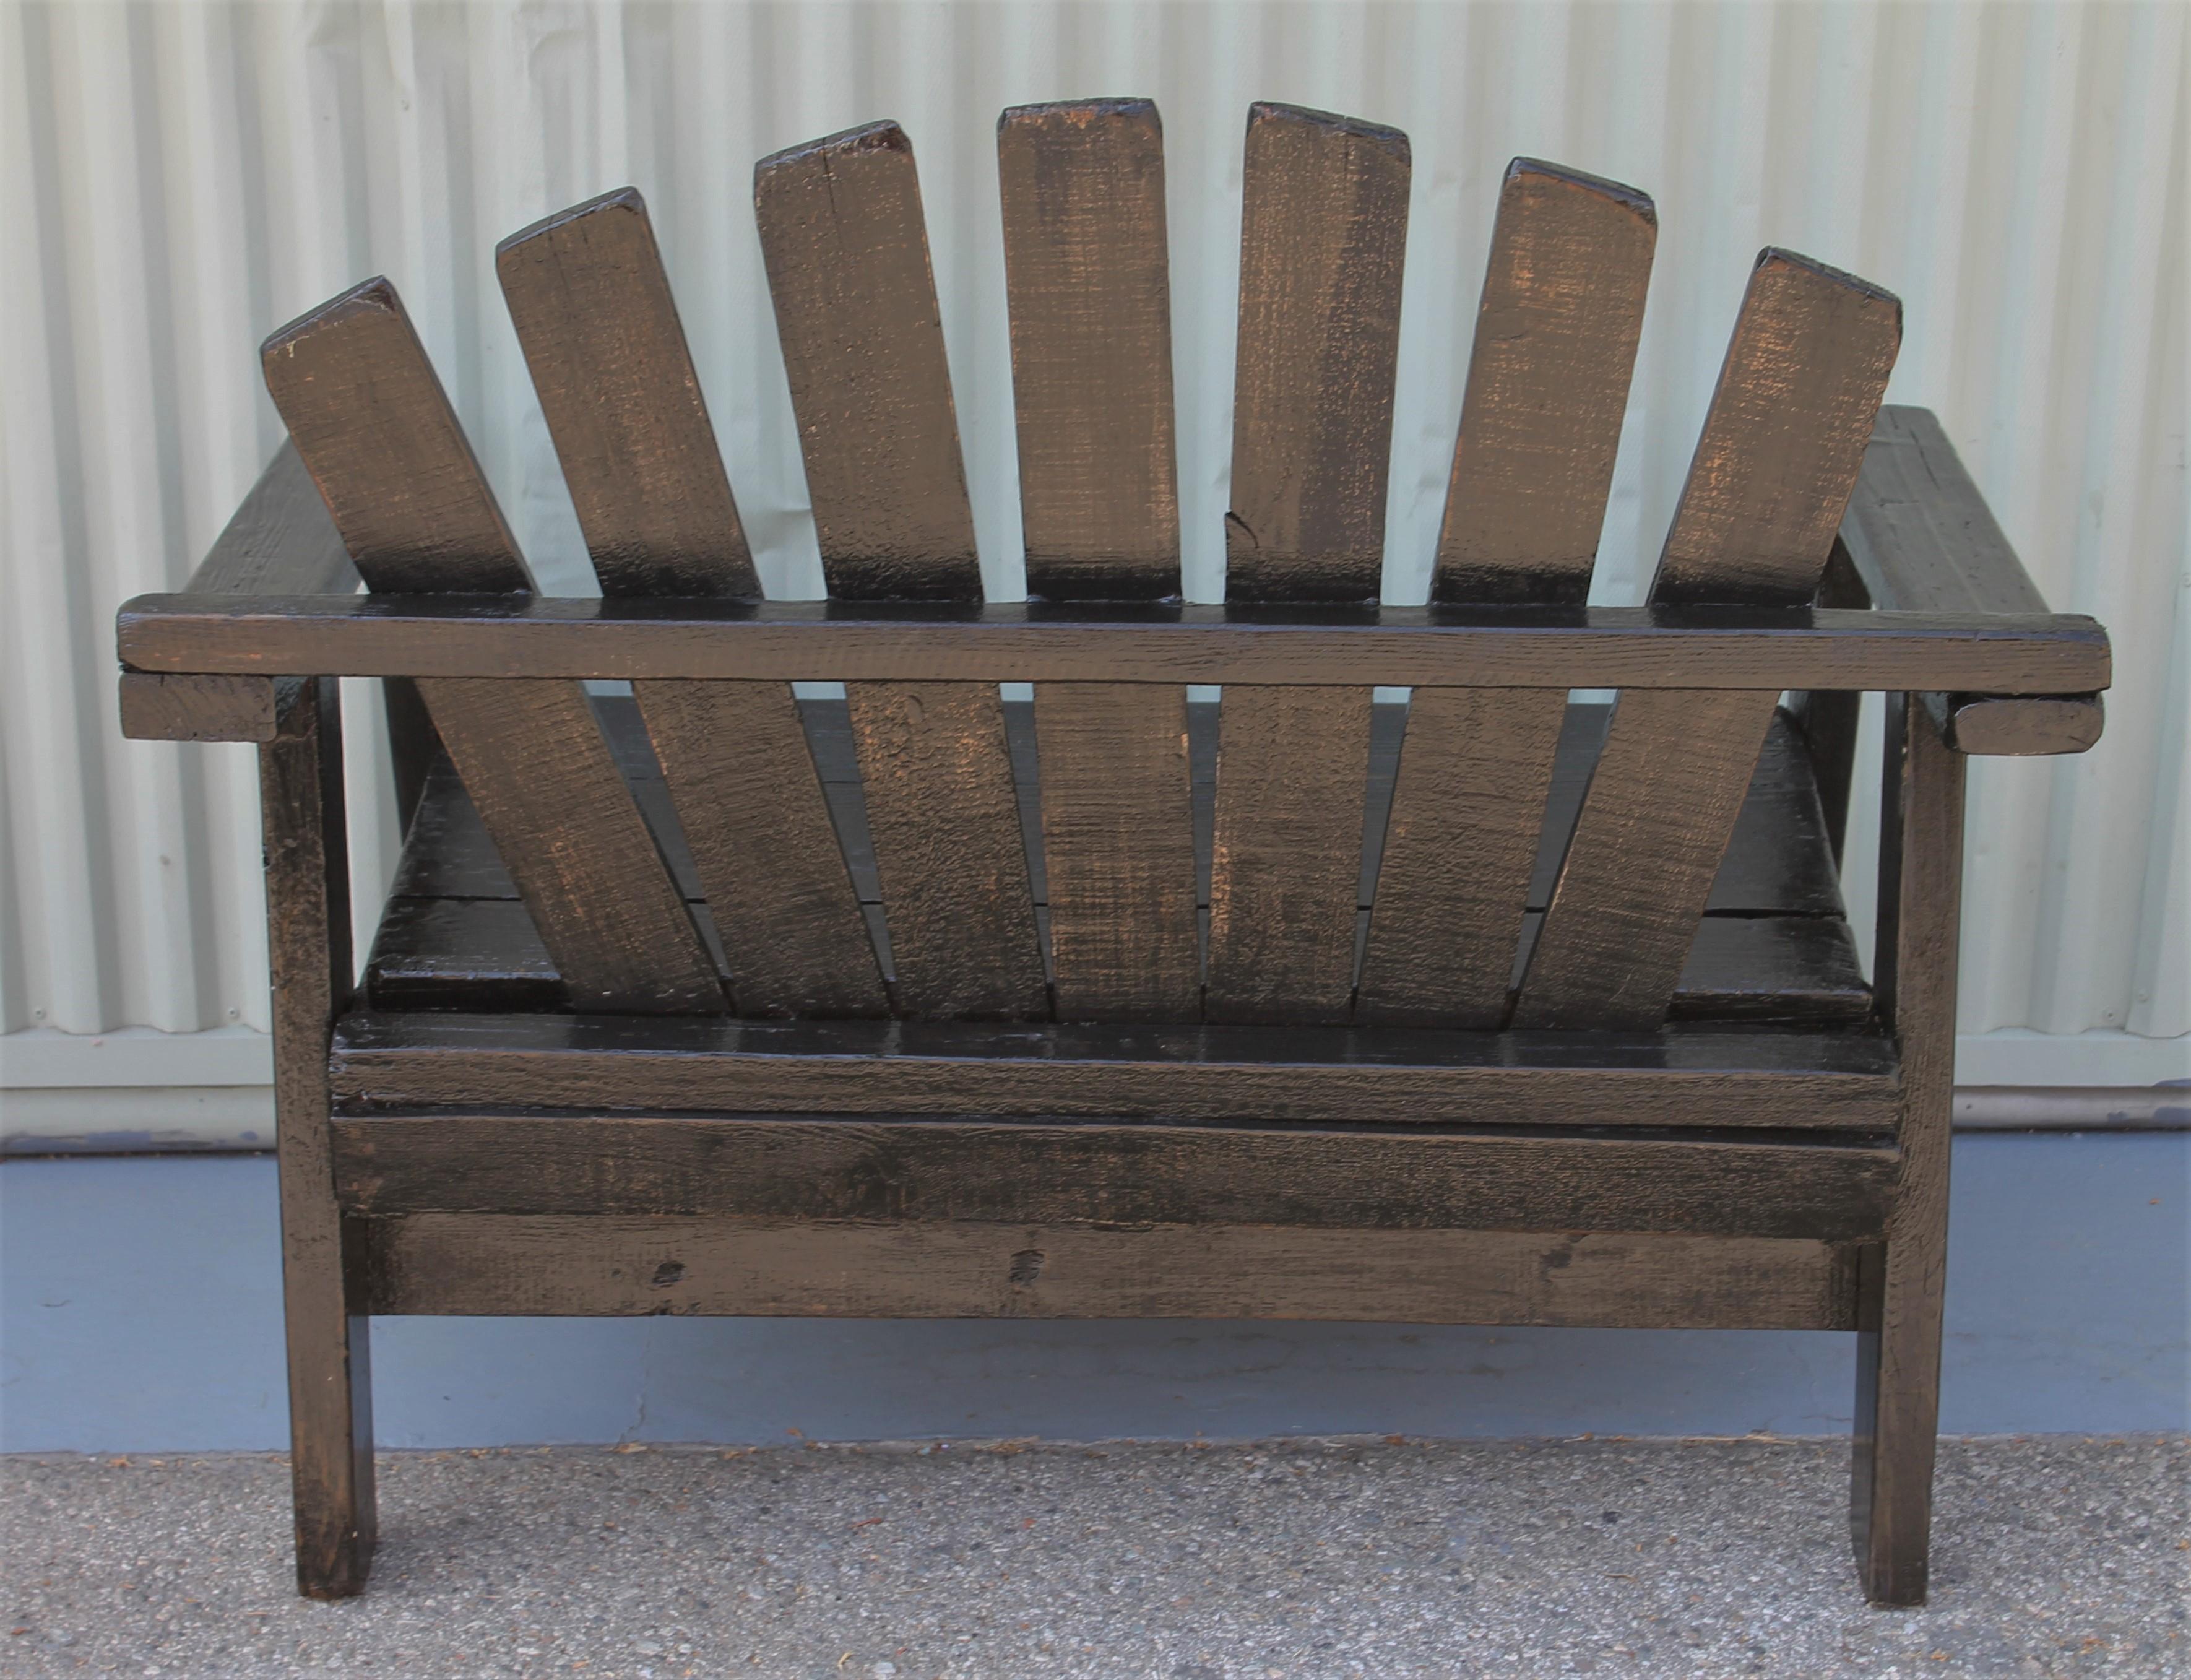 Hand-Crafted 20th Century Adirondack Black Painted Patio Chair and Bench